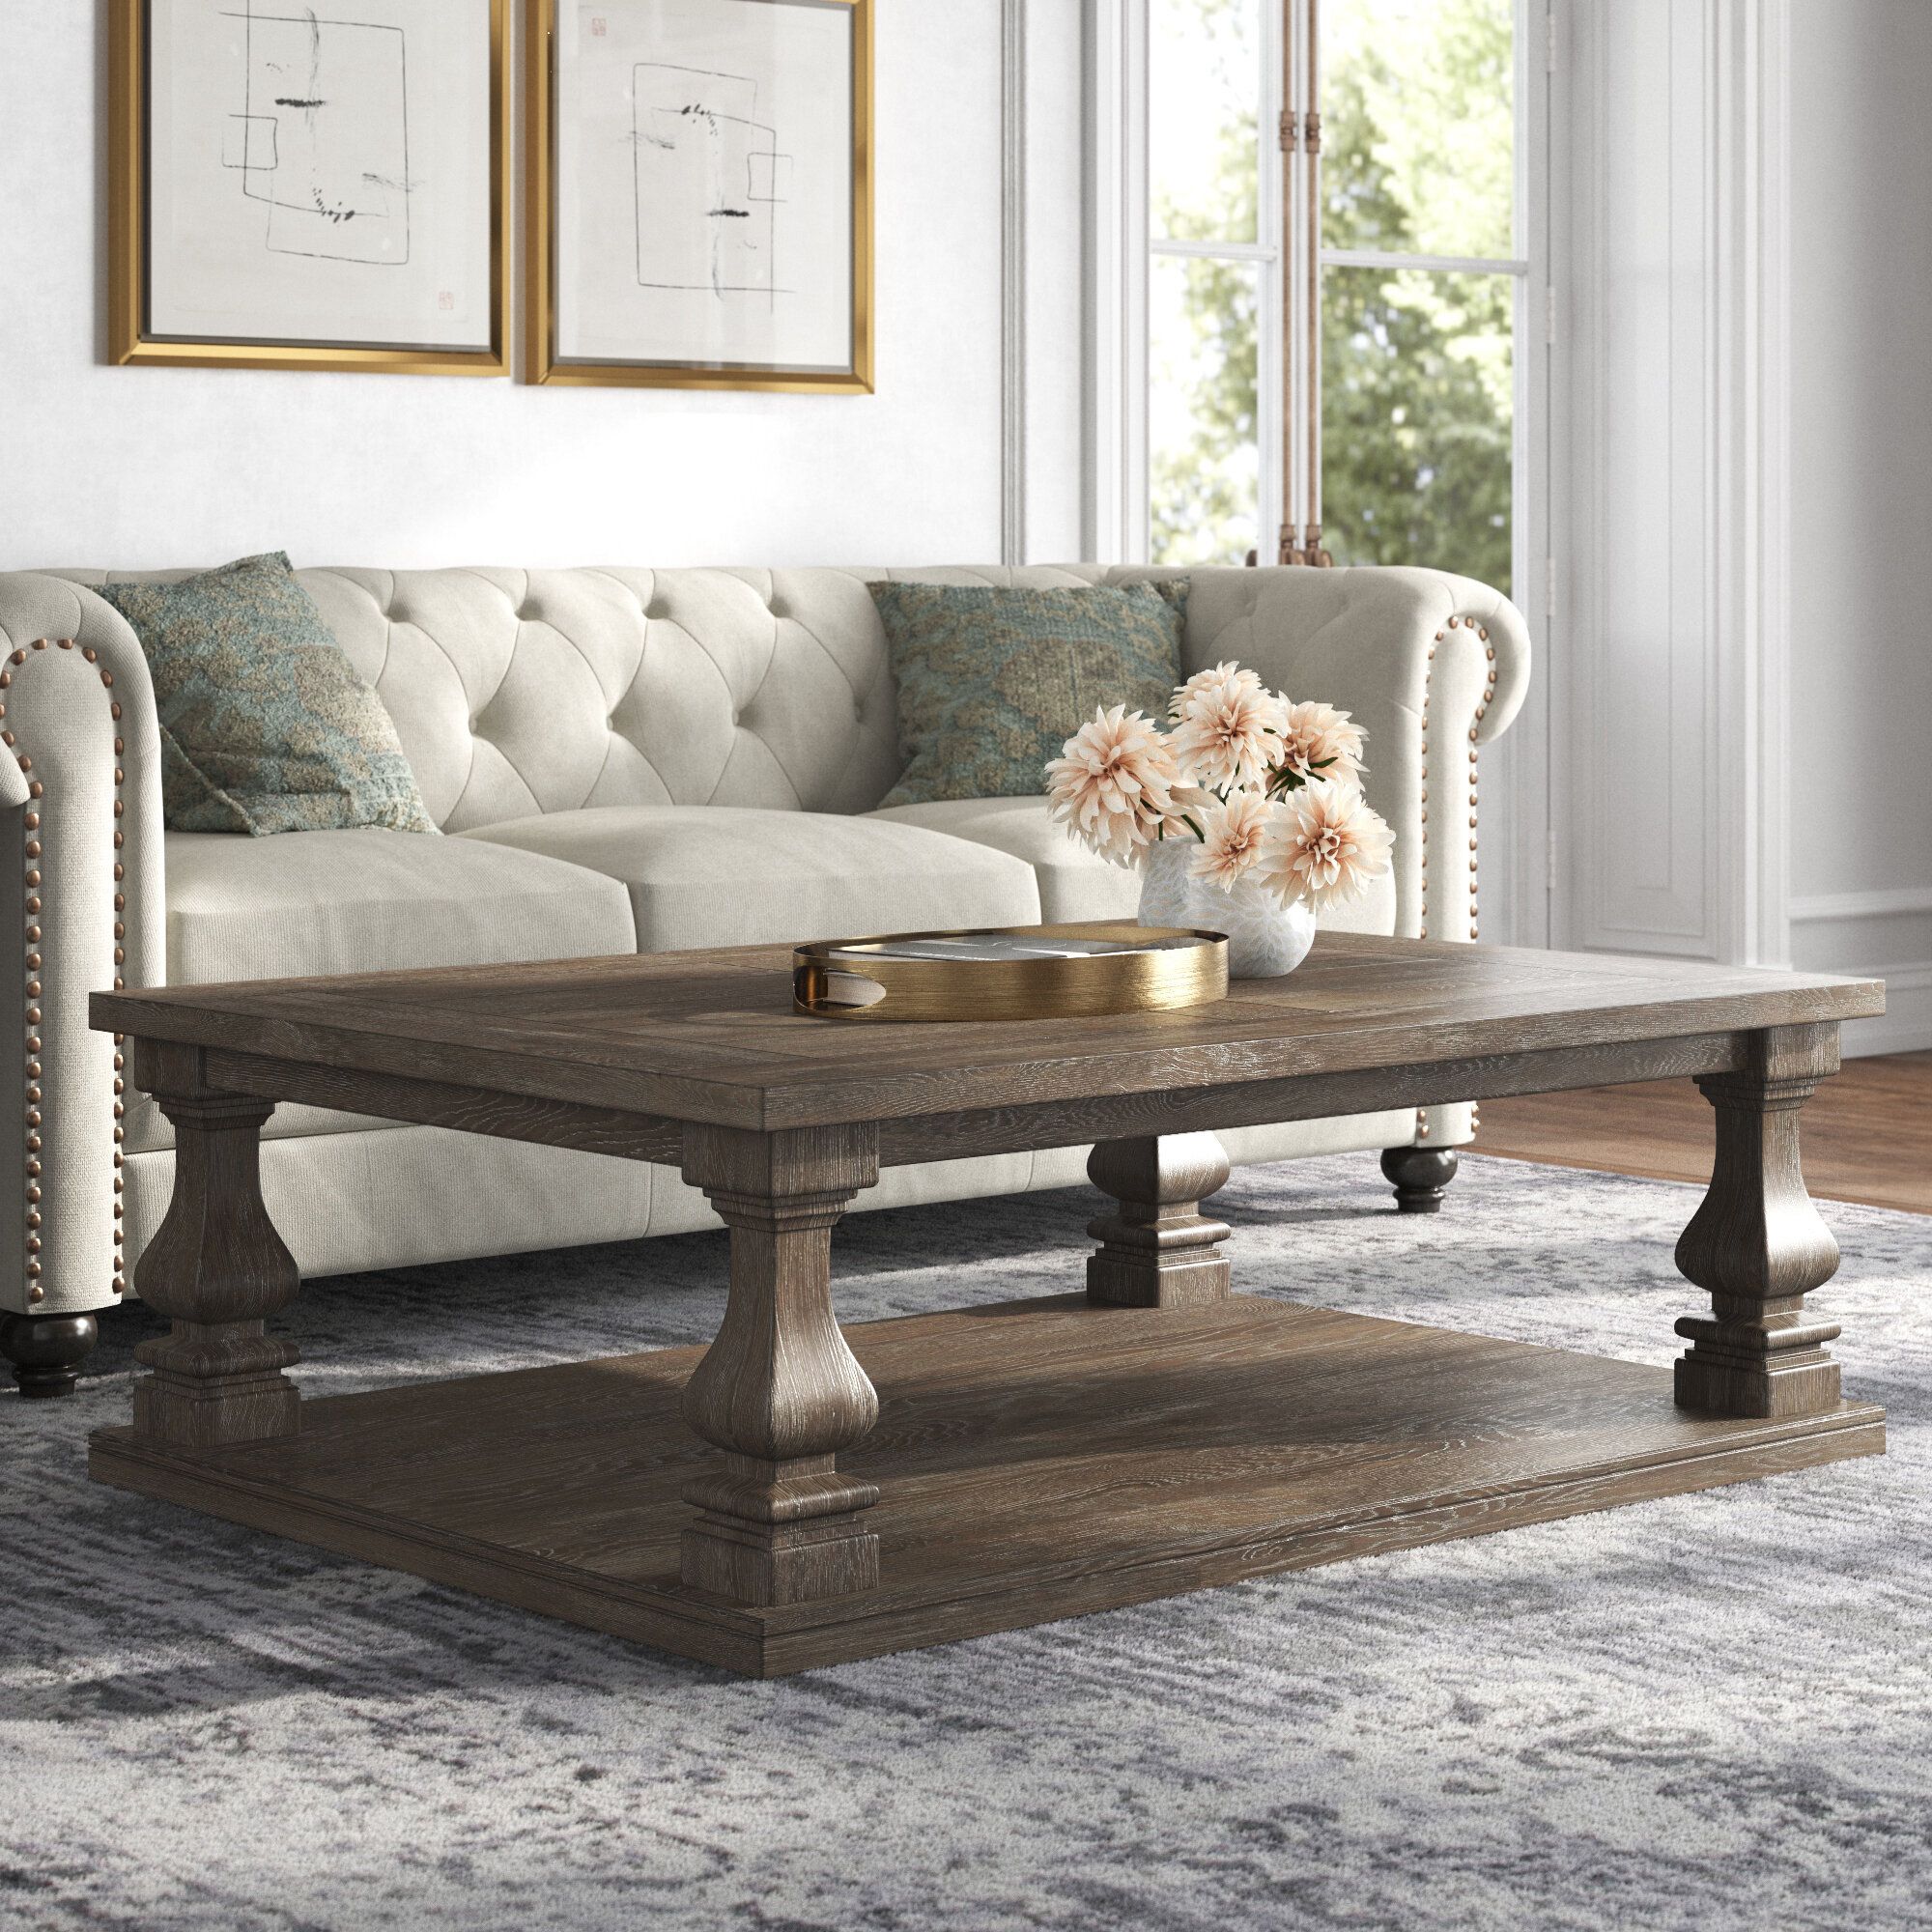 Kelly Clarkson Home Briana Floor Shelf Coffee Table & Reviews | Wayfair In Coffee Tables With Shelf (View 19 of 20)